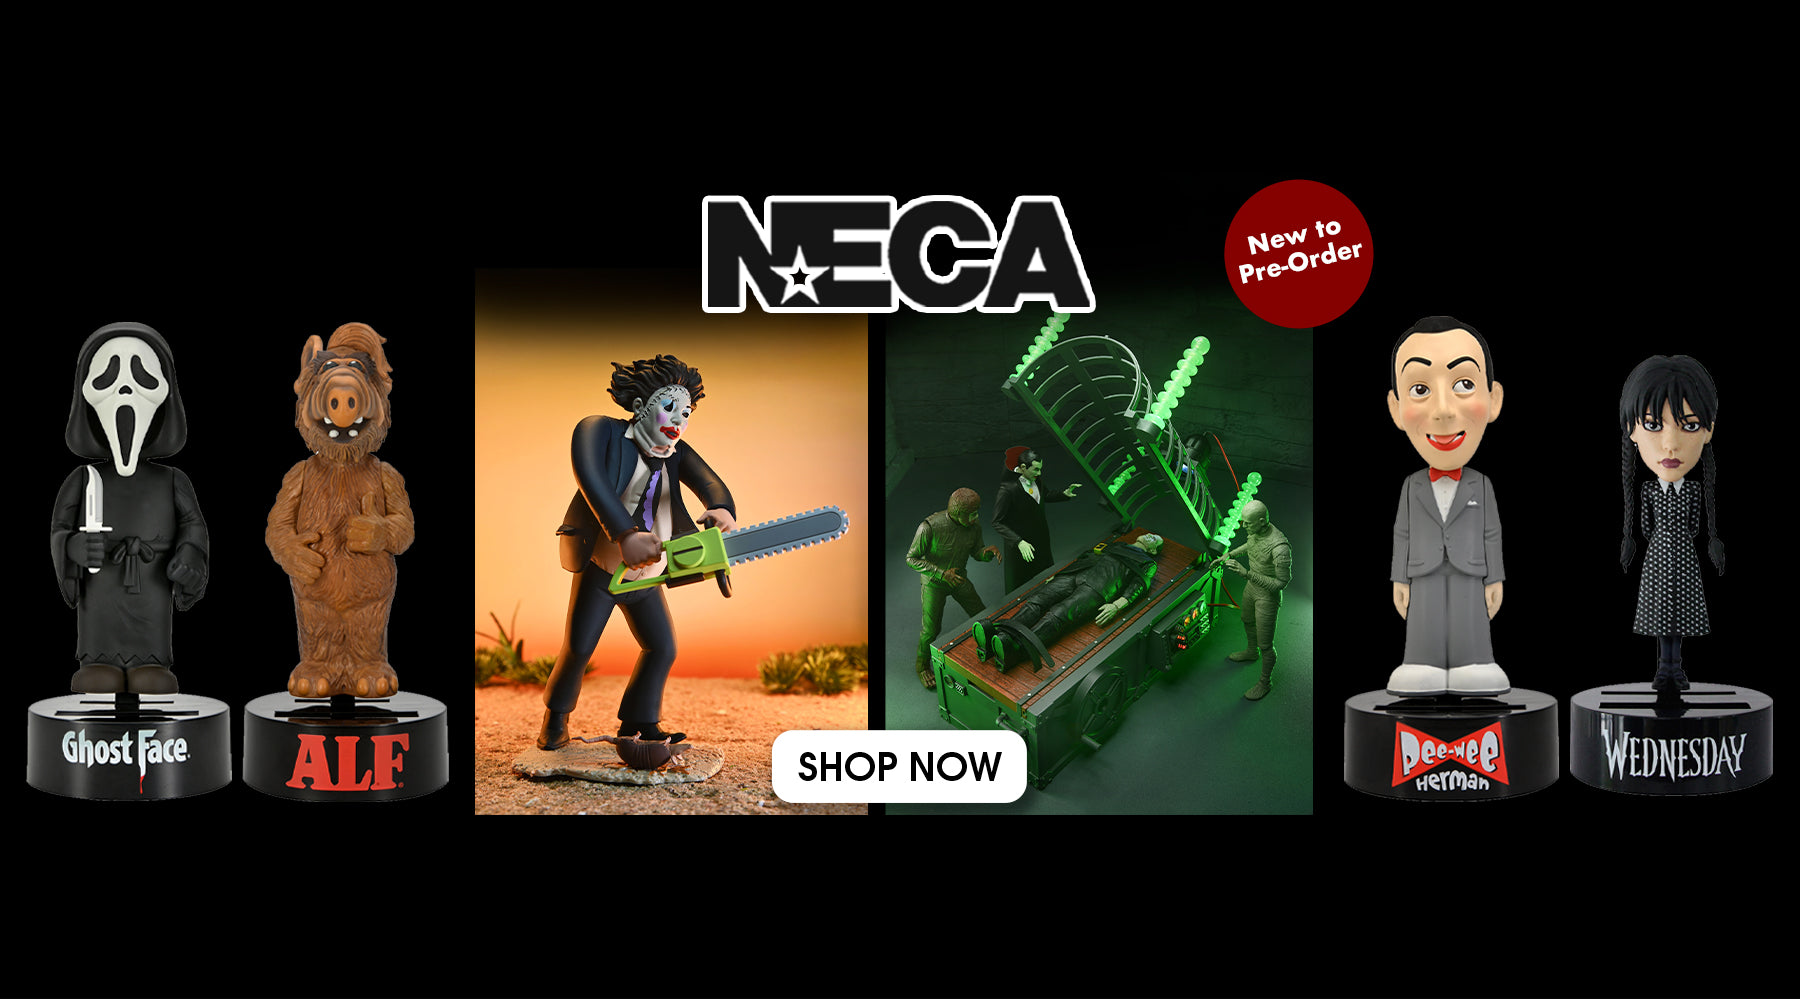 New NECA action figures, accessories (like the monsterizer!), head knockers and body knockers are available to pre-order at Costume Super Centre Australia